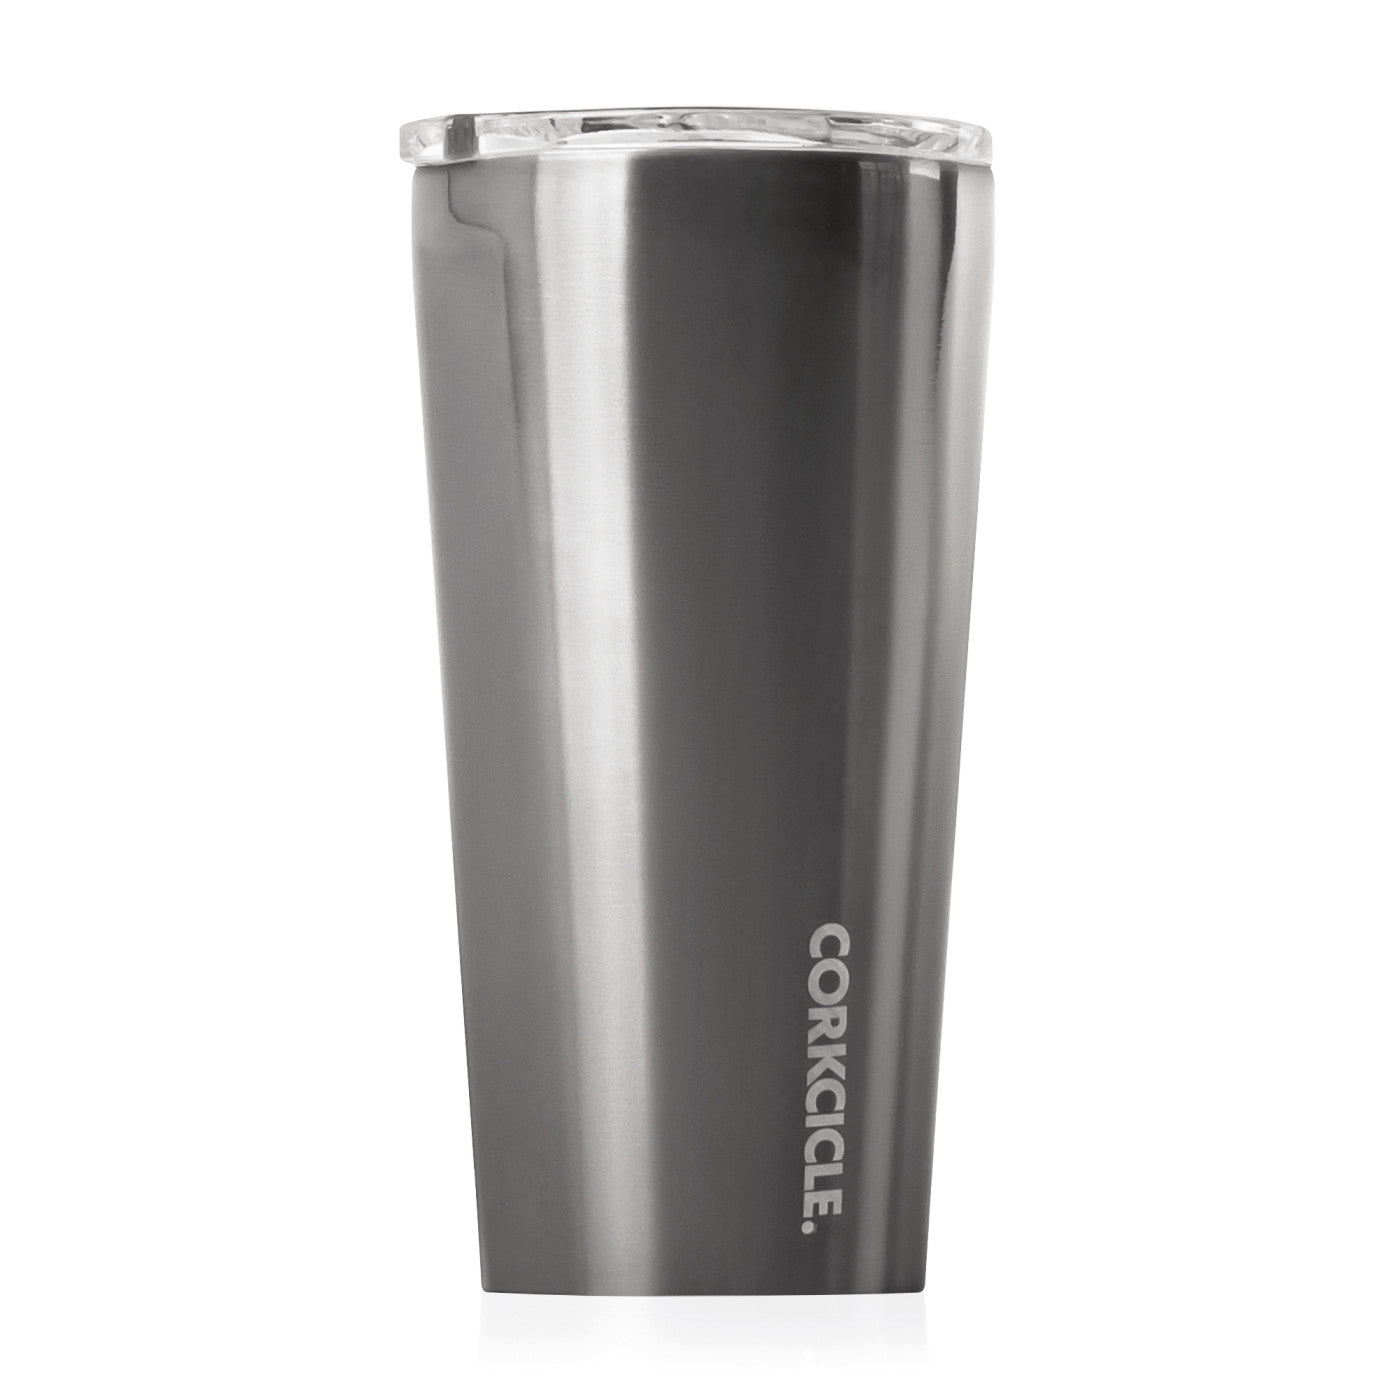 Corkcicle Special Collections 16oz Tumbler, Gunmetal